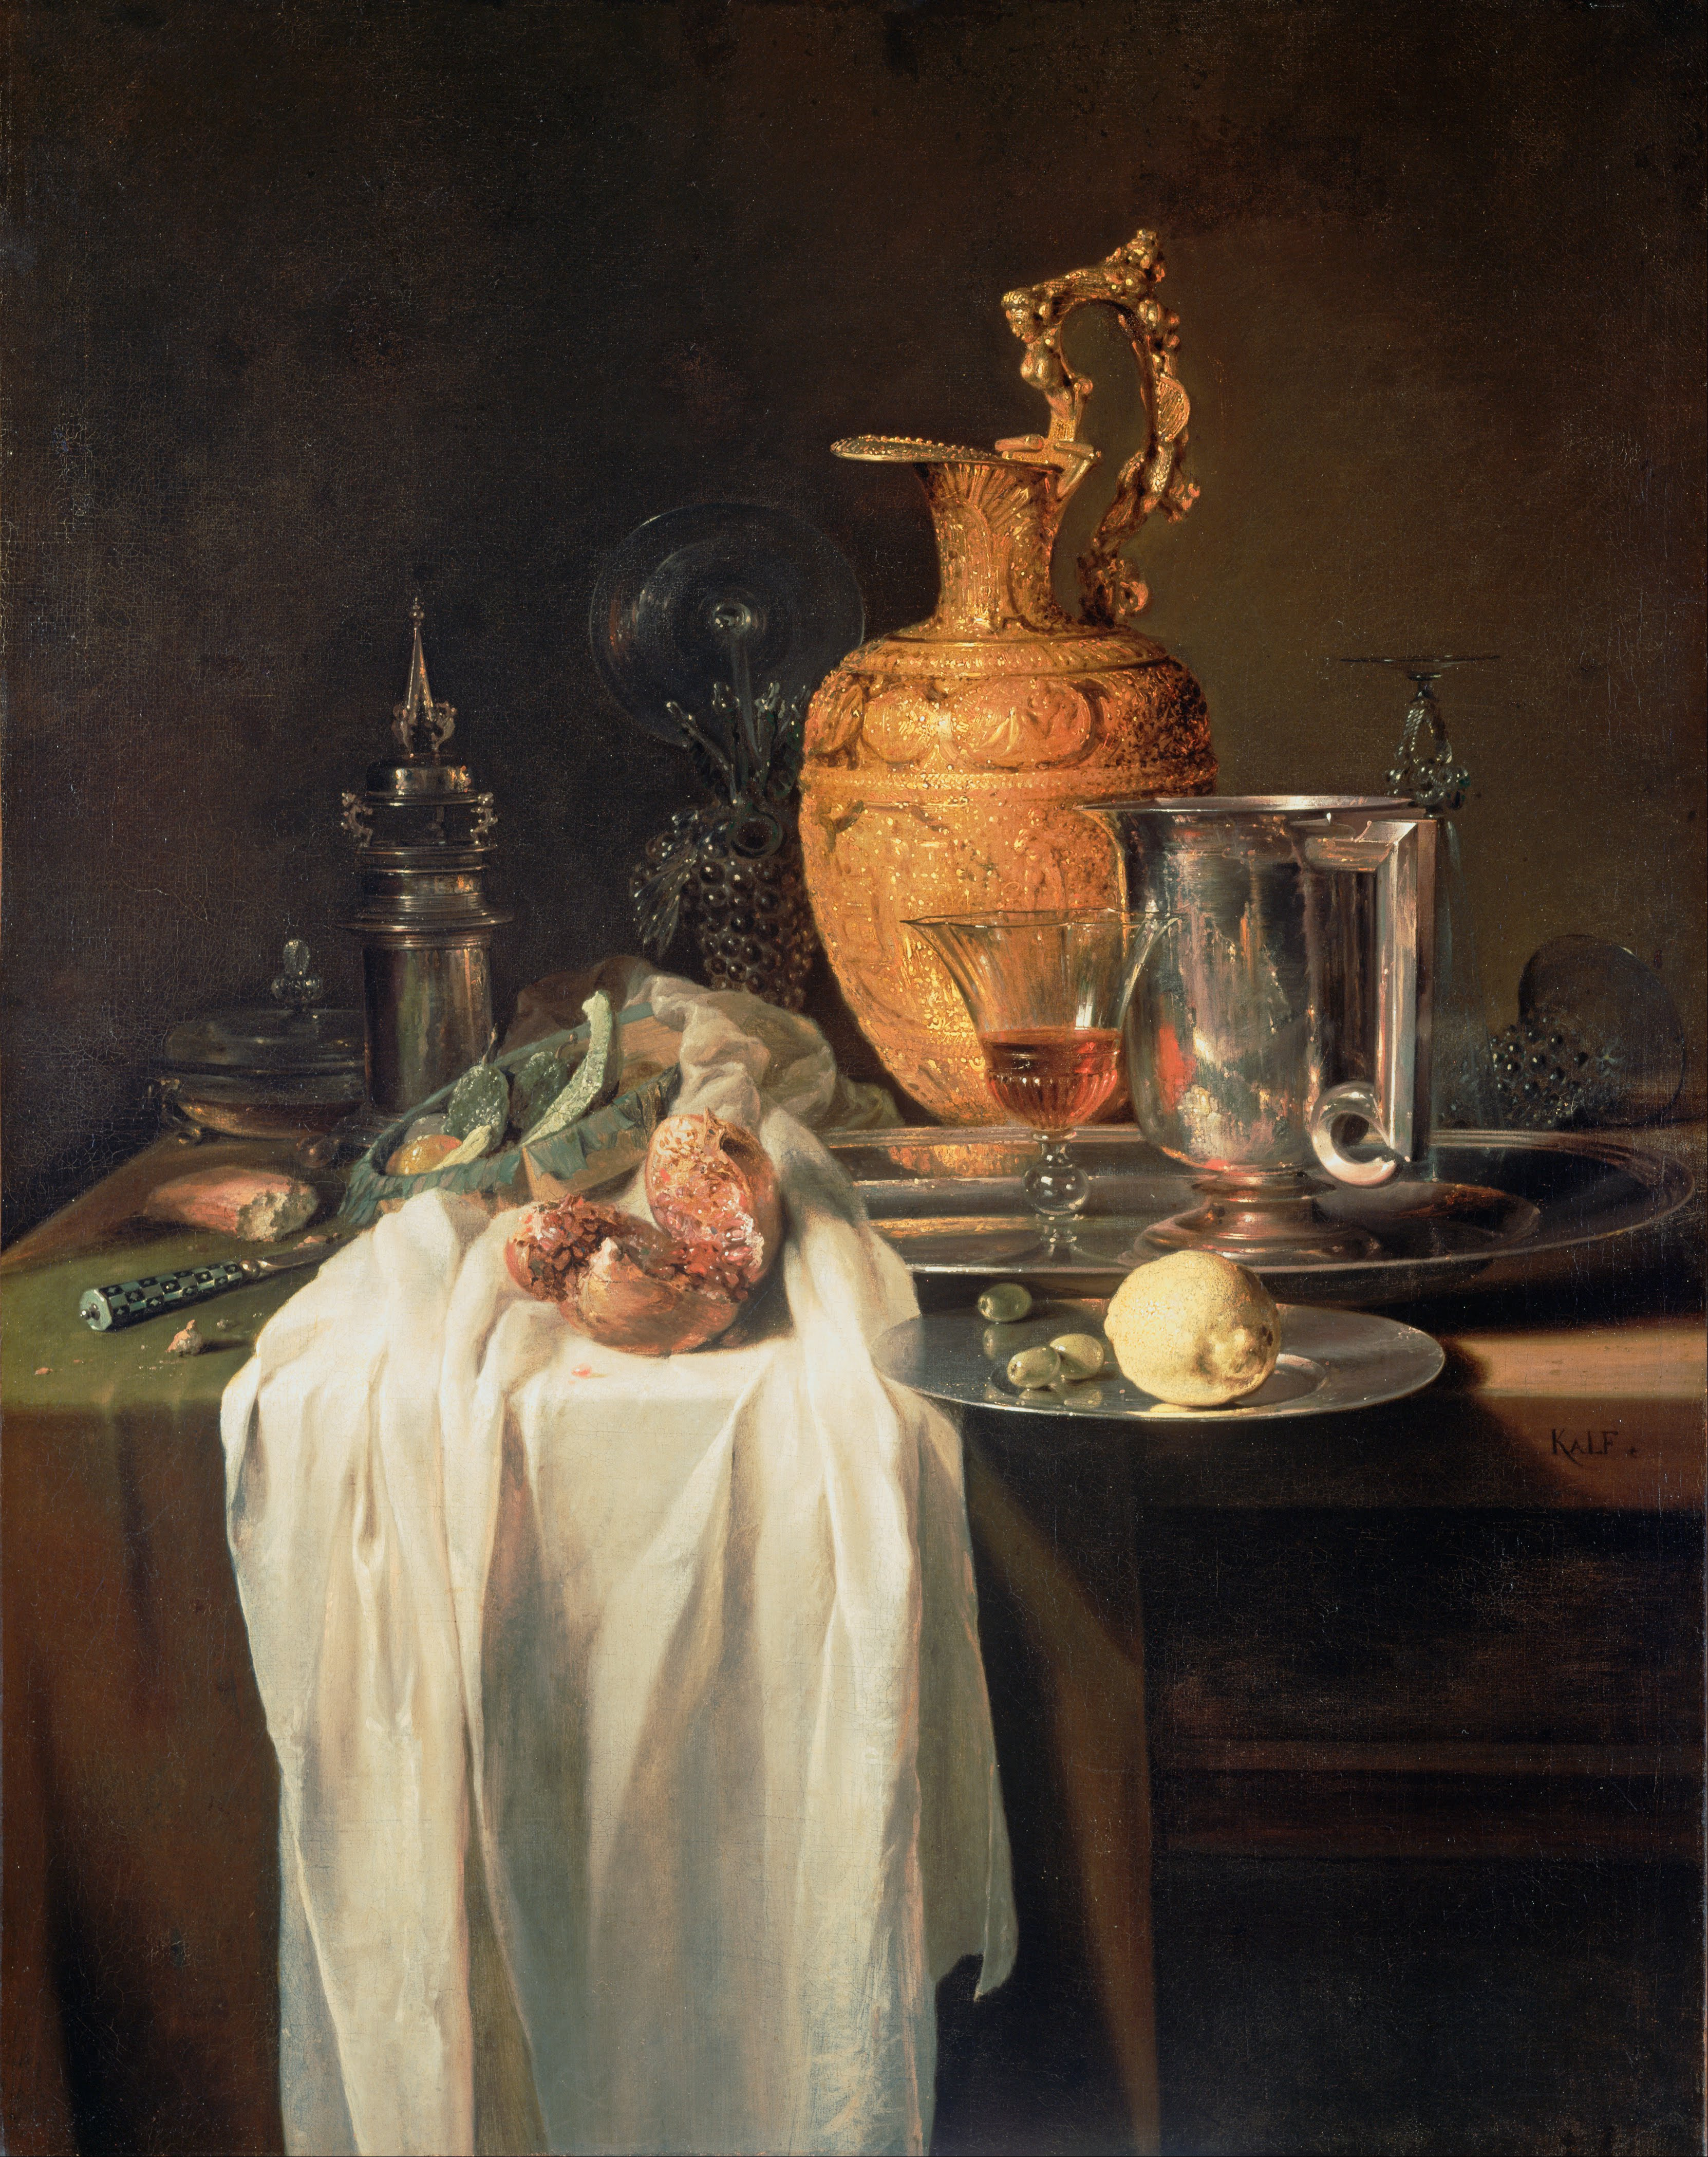 Pictura Clasica - Pagina 3 Kalf,_Willem_-_Still_Life_with_Ewer,_Vessels_and_Pomegranate_-_Google_Art_Project